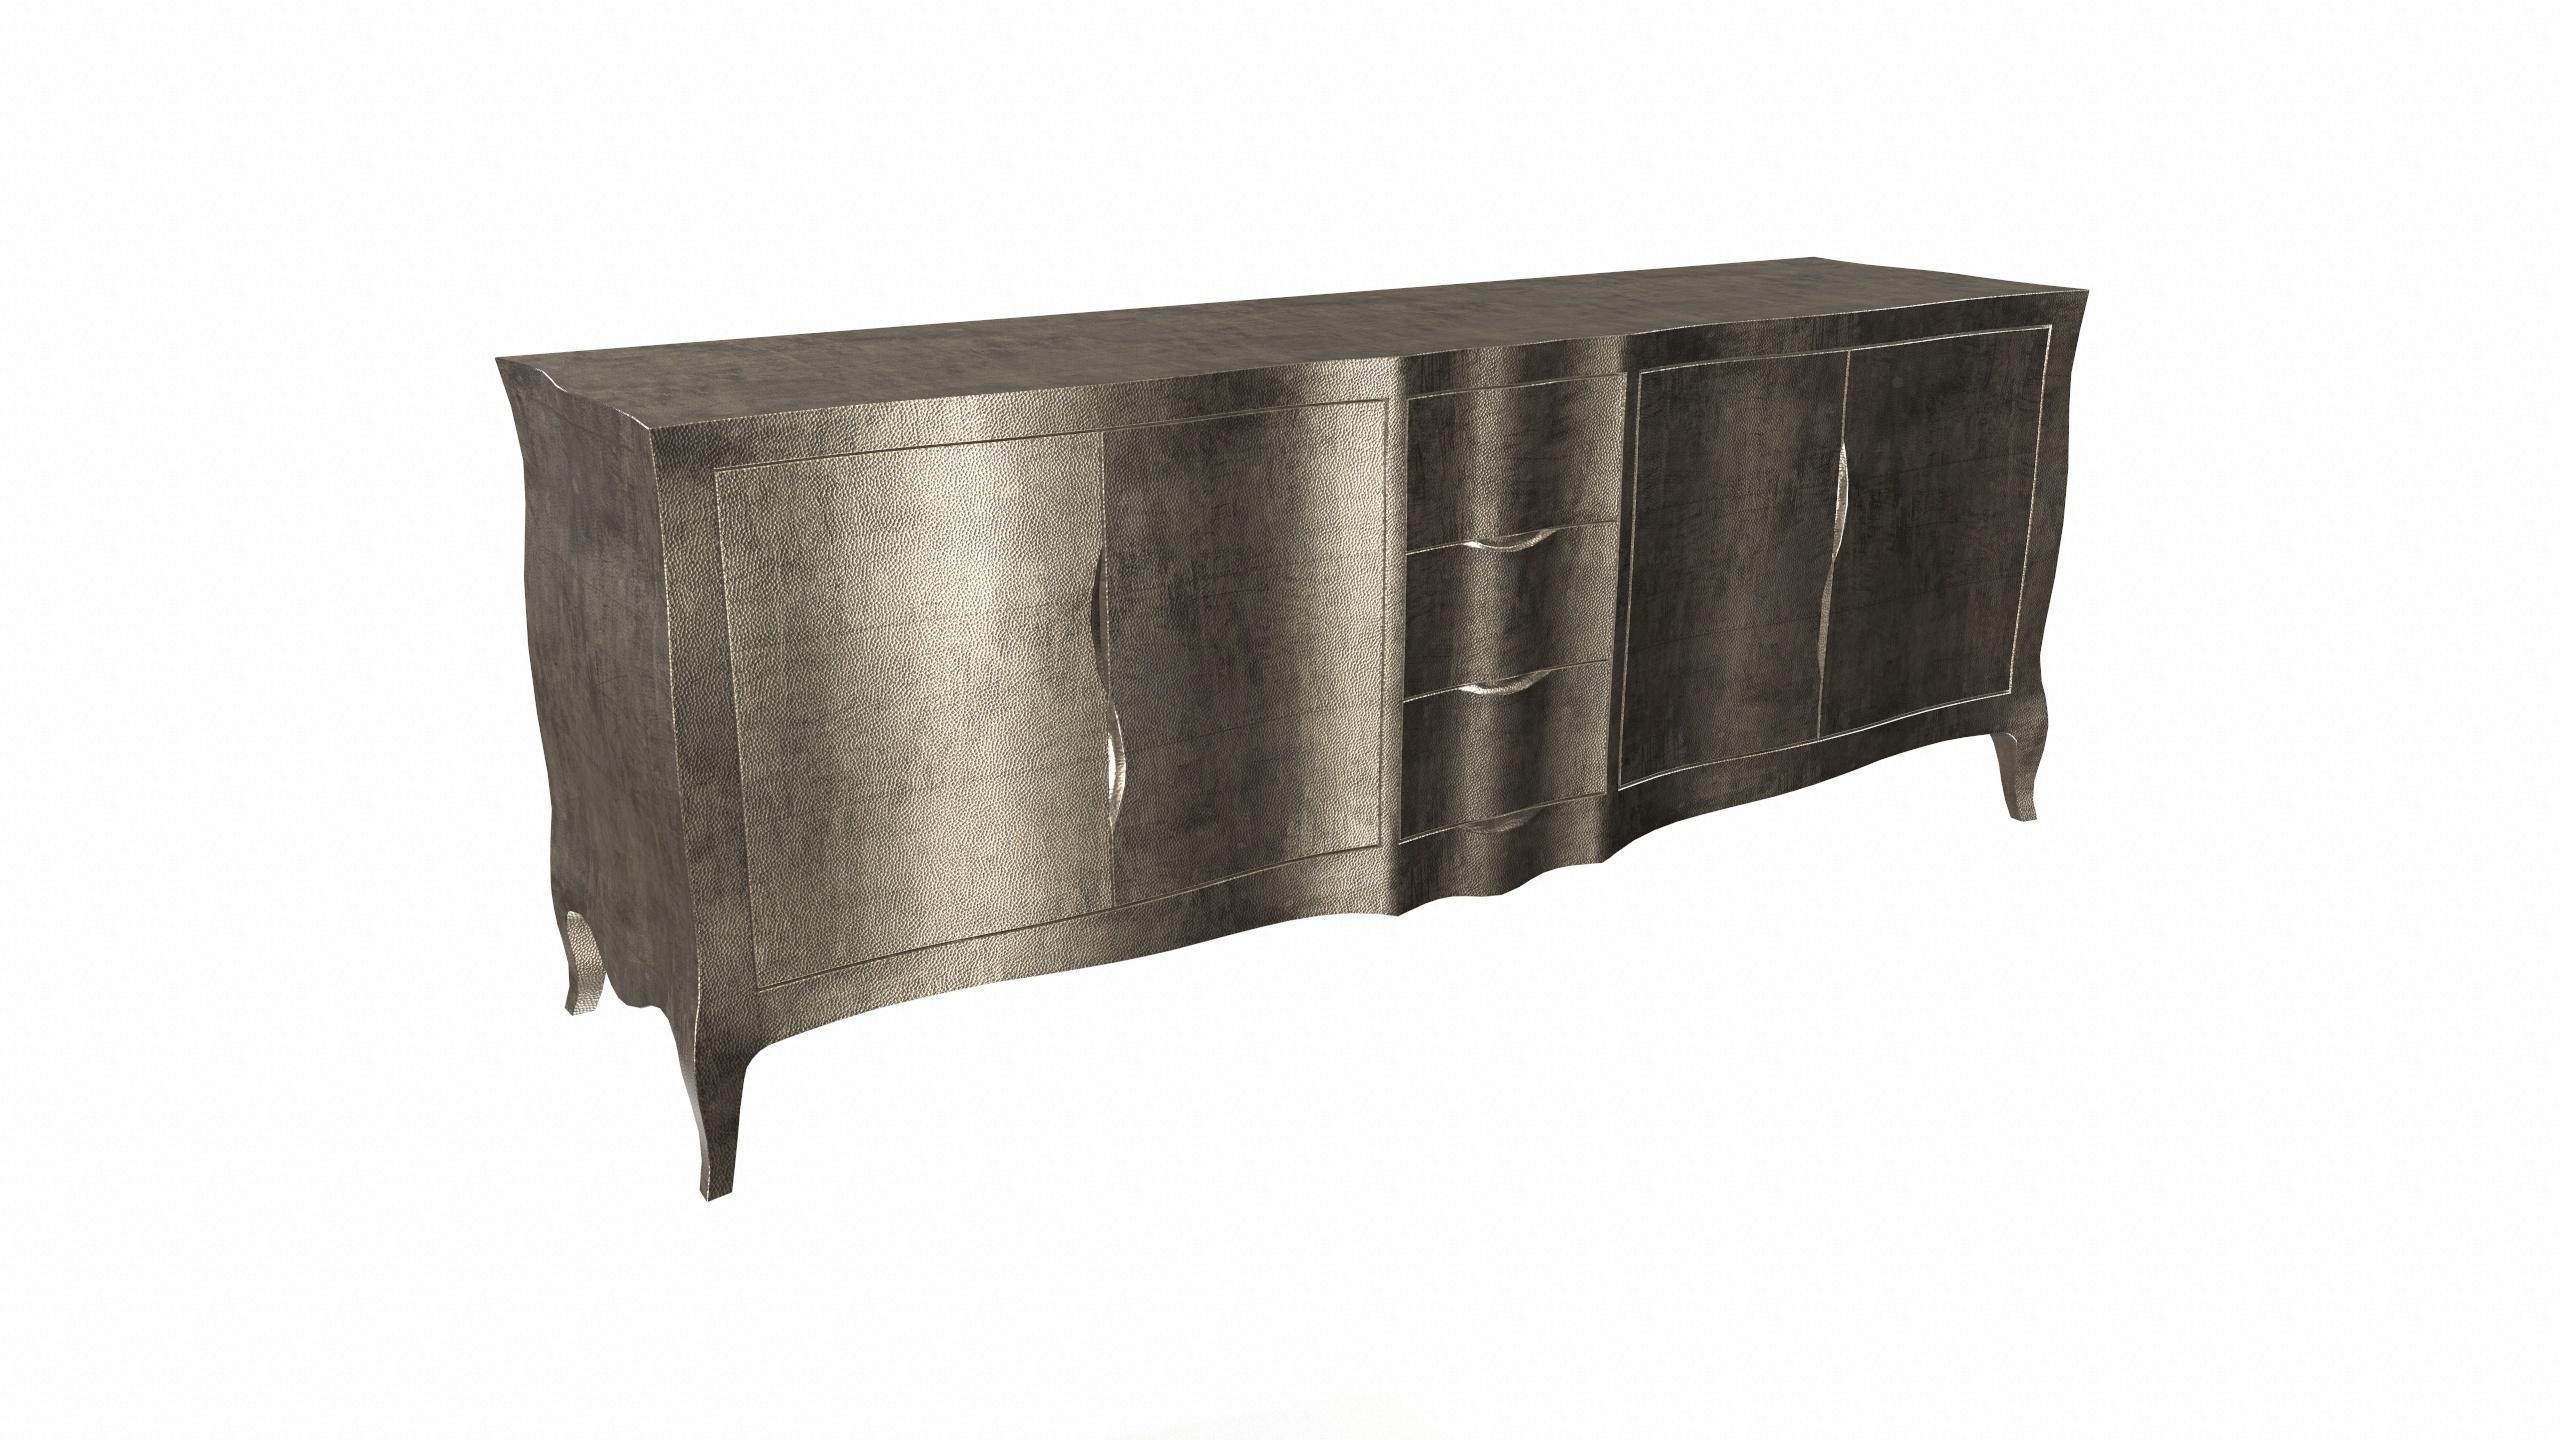 Contemporary Louise Credenza Art Deco Bookcases in Mid. Hammered Antique Bronze by P Mathieu For Sale